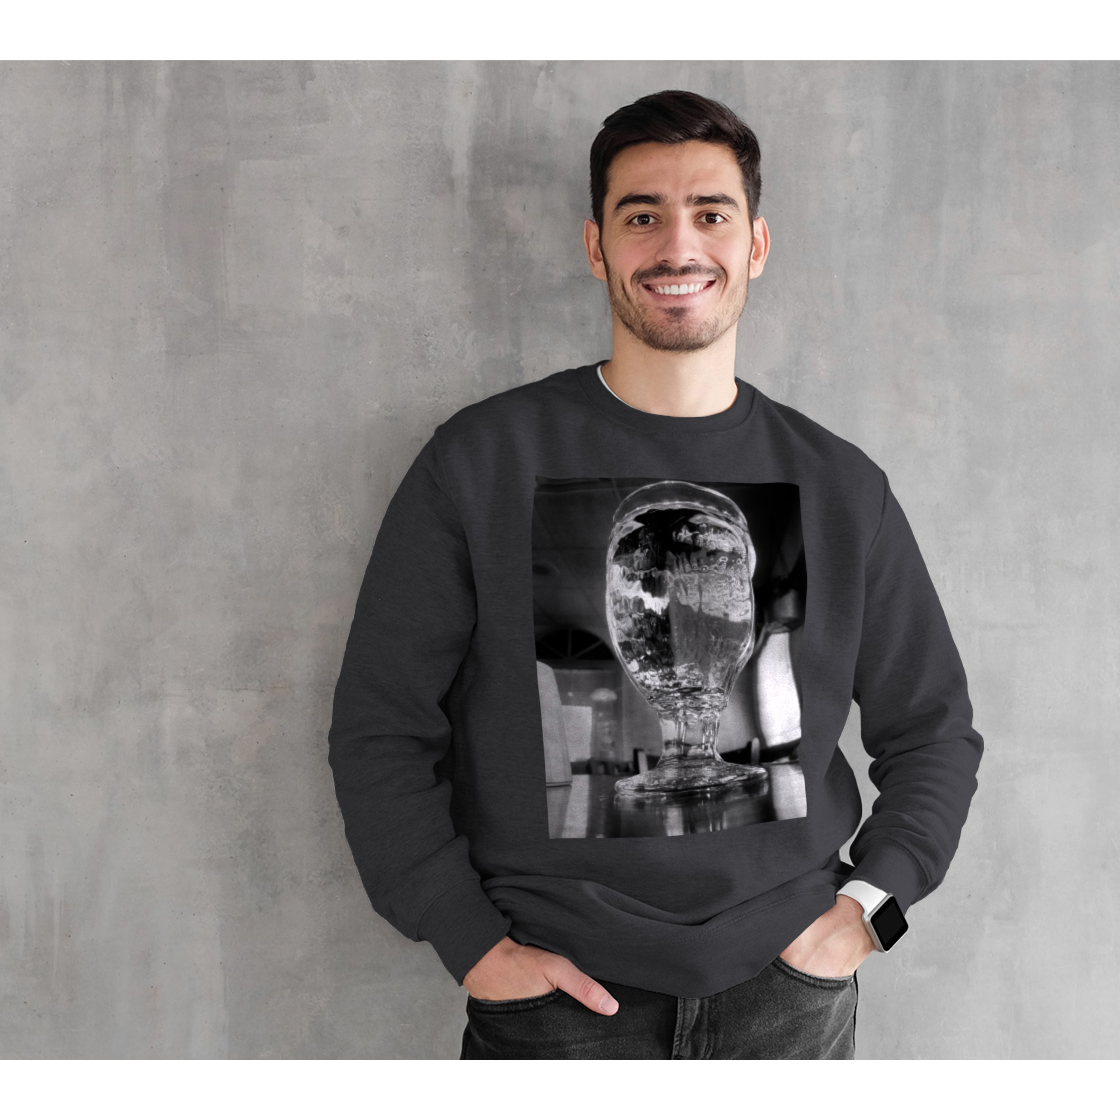 Sweatshirt for Women and Men with Water Glass Picture, Male Front